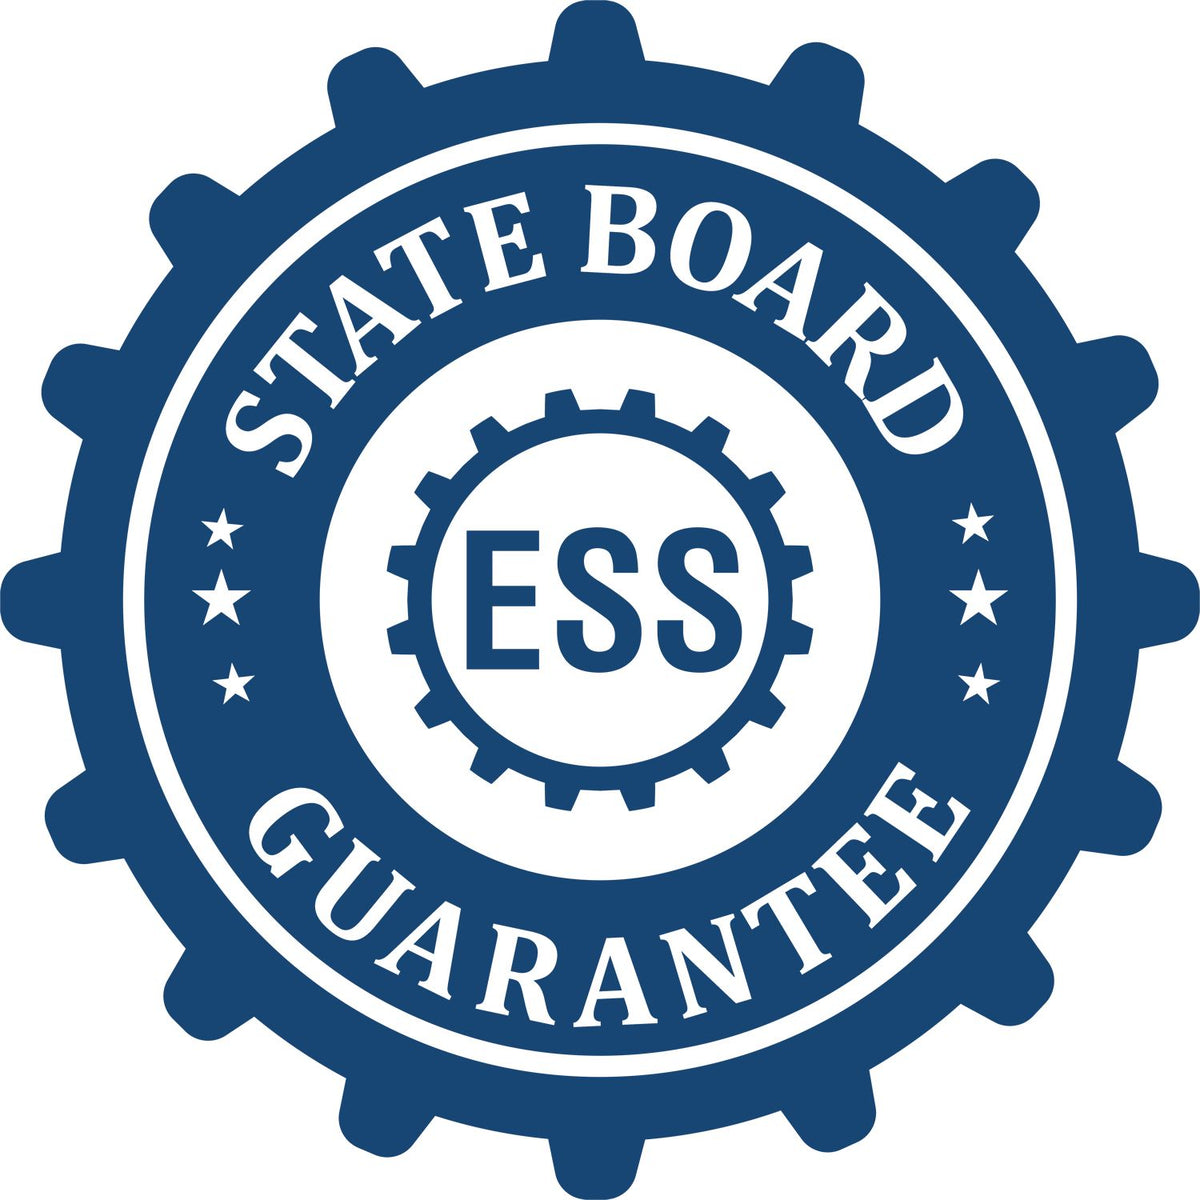 An emblem in a gear shape illustrating a state board guarantee for the Digital Indiana PE Stamp and Electronic Seal for Indiana Engineer product.